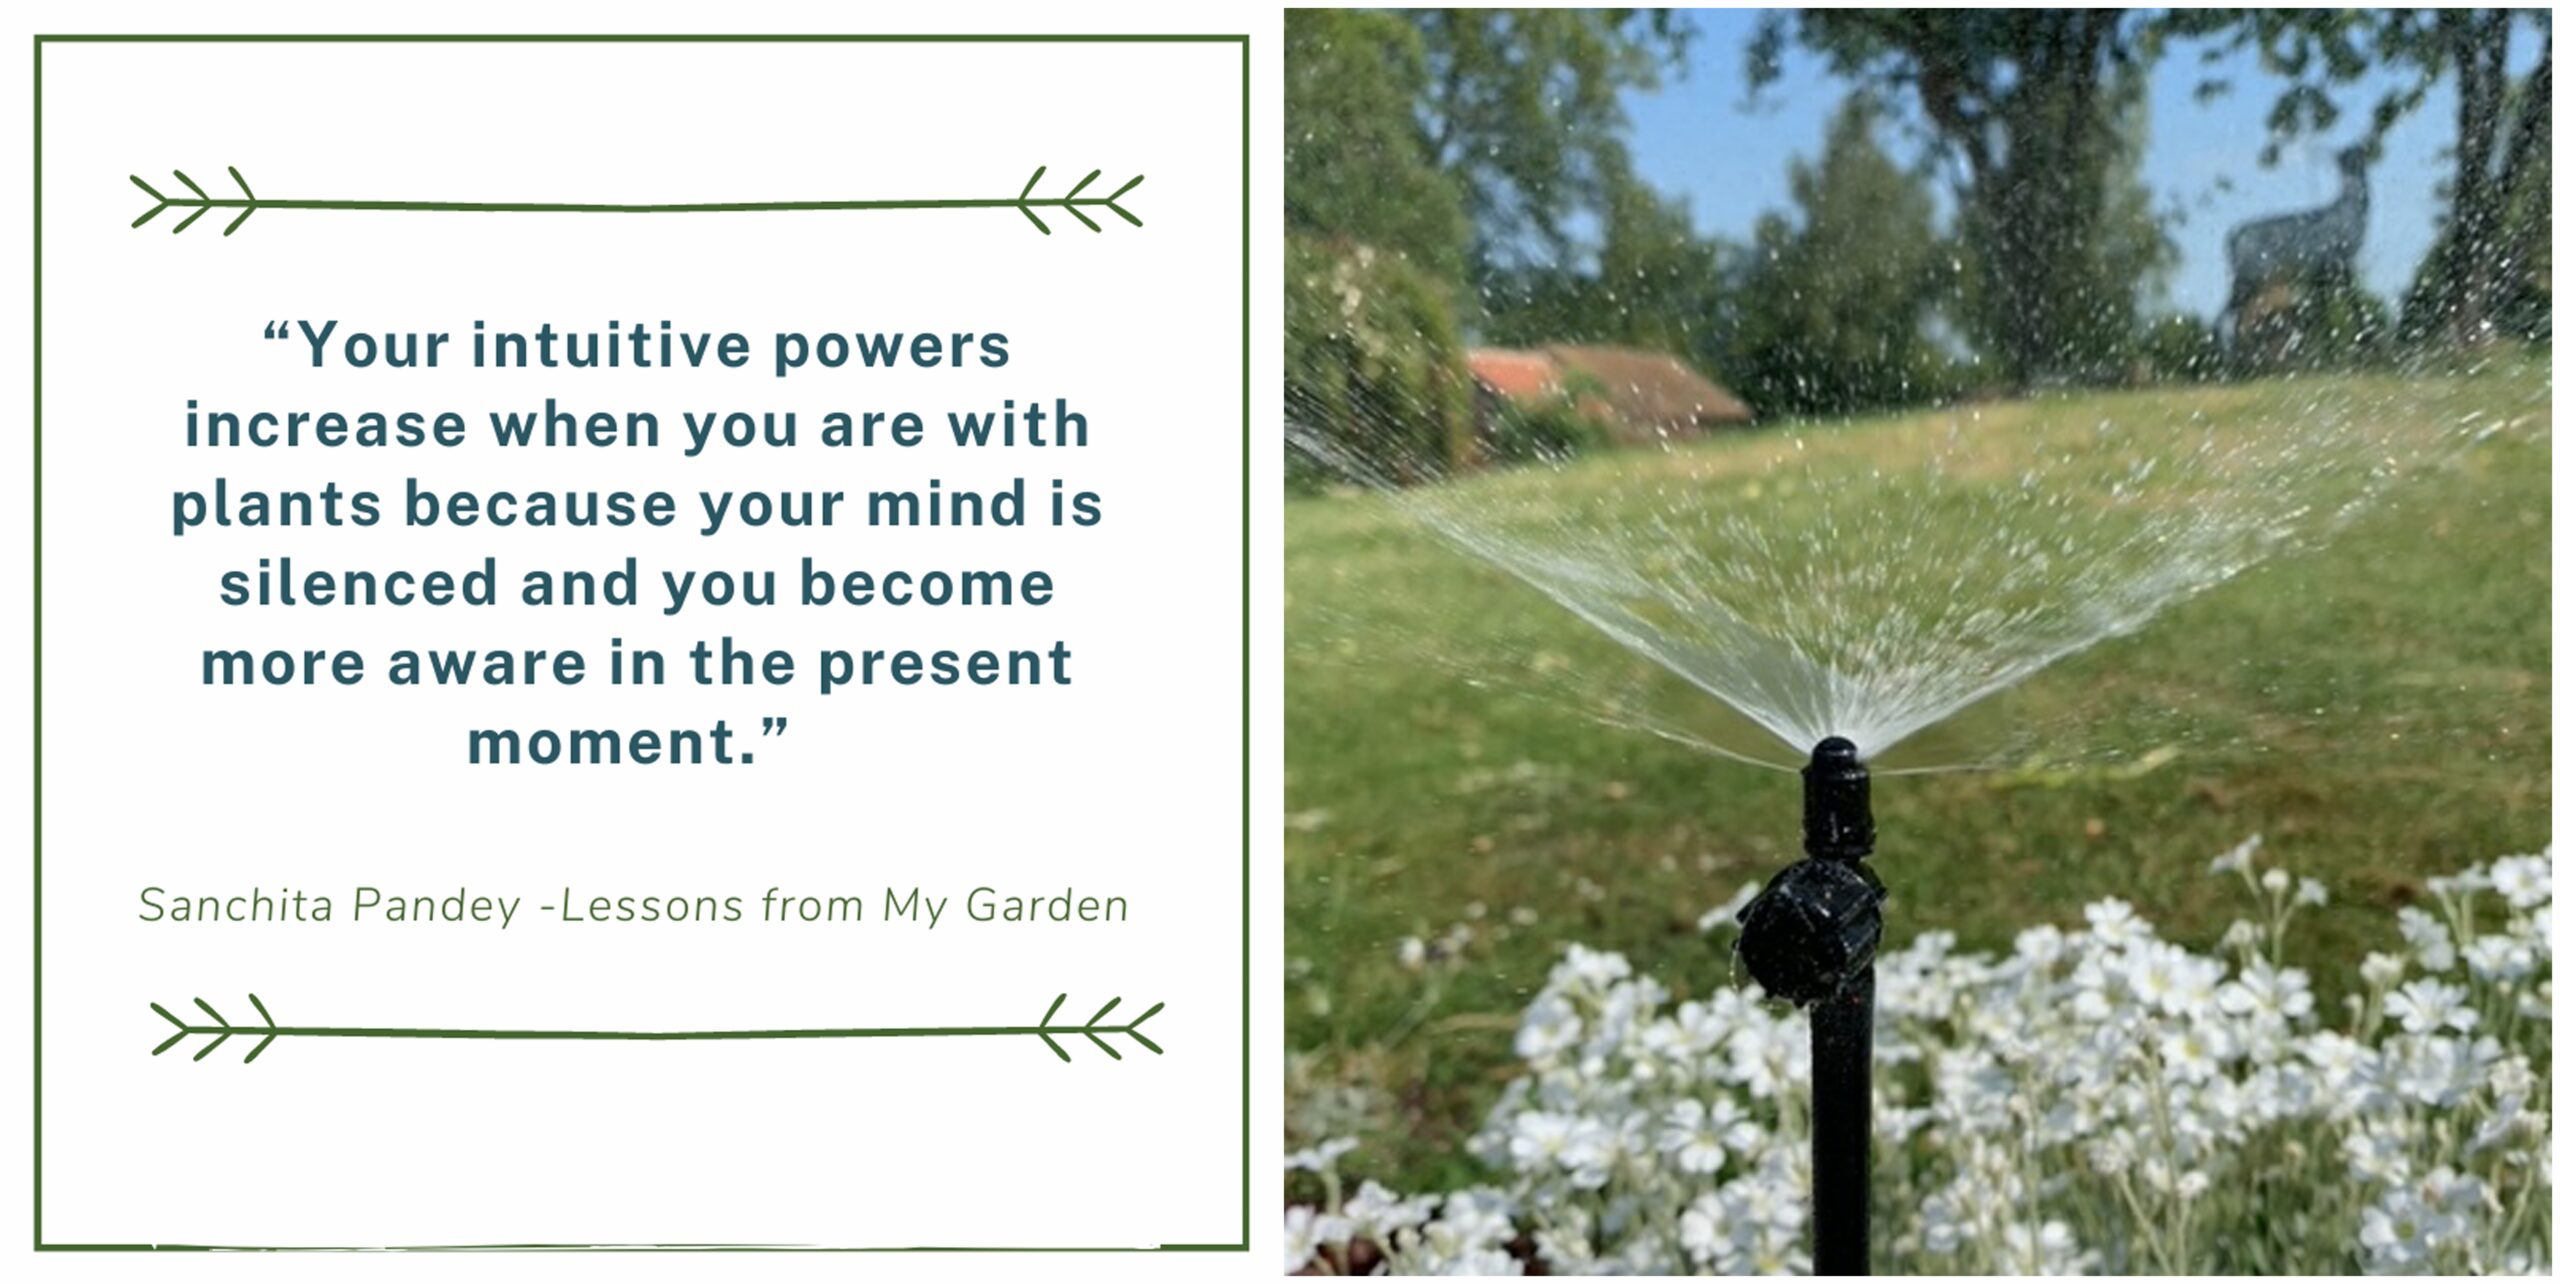 be present in nature, and make sure your garden is thriving so you can experience the most from it